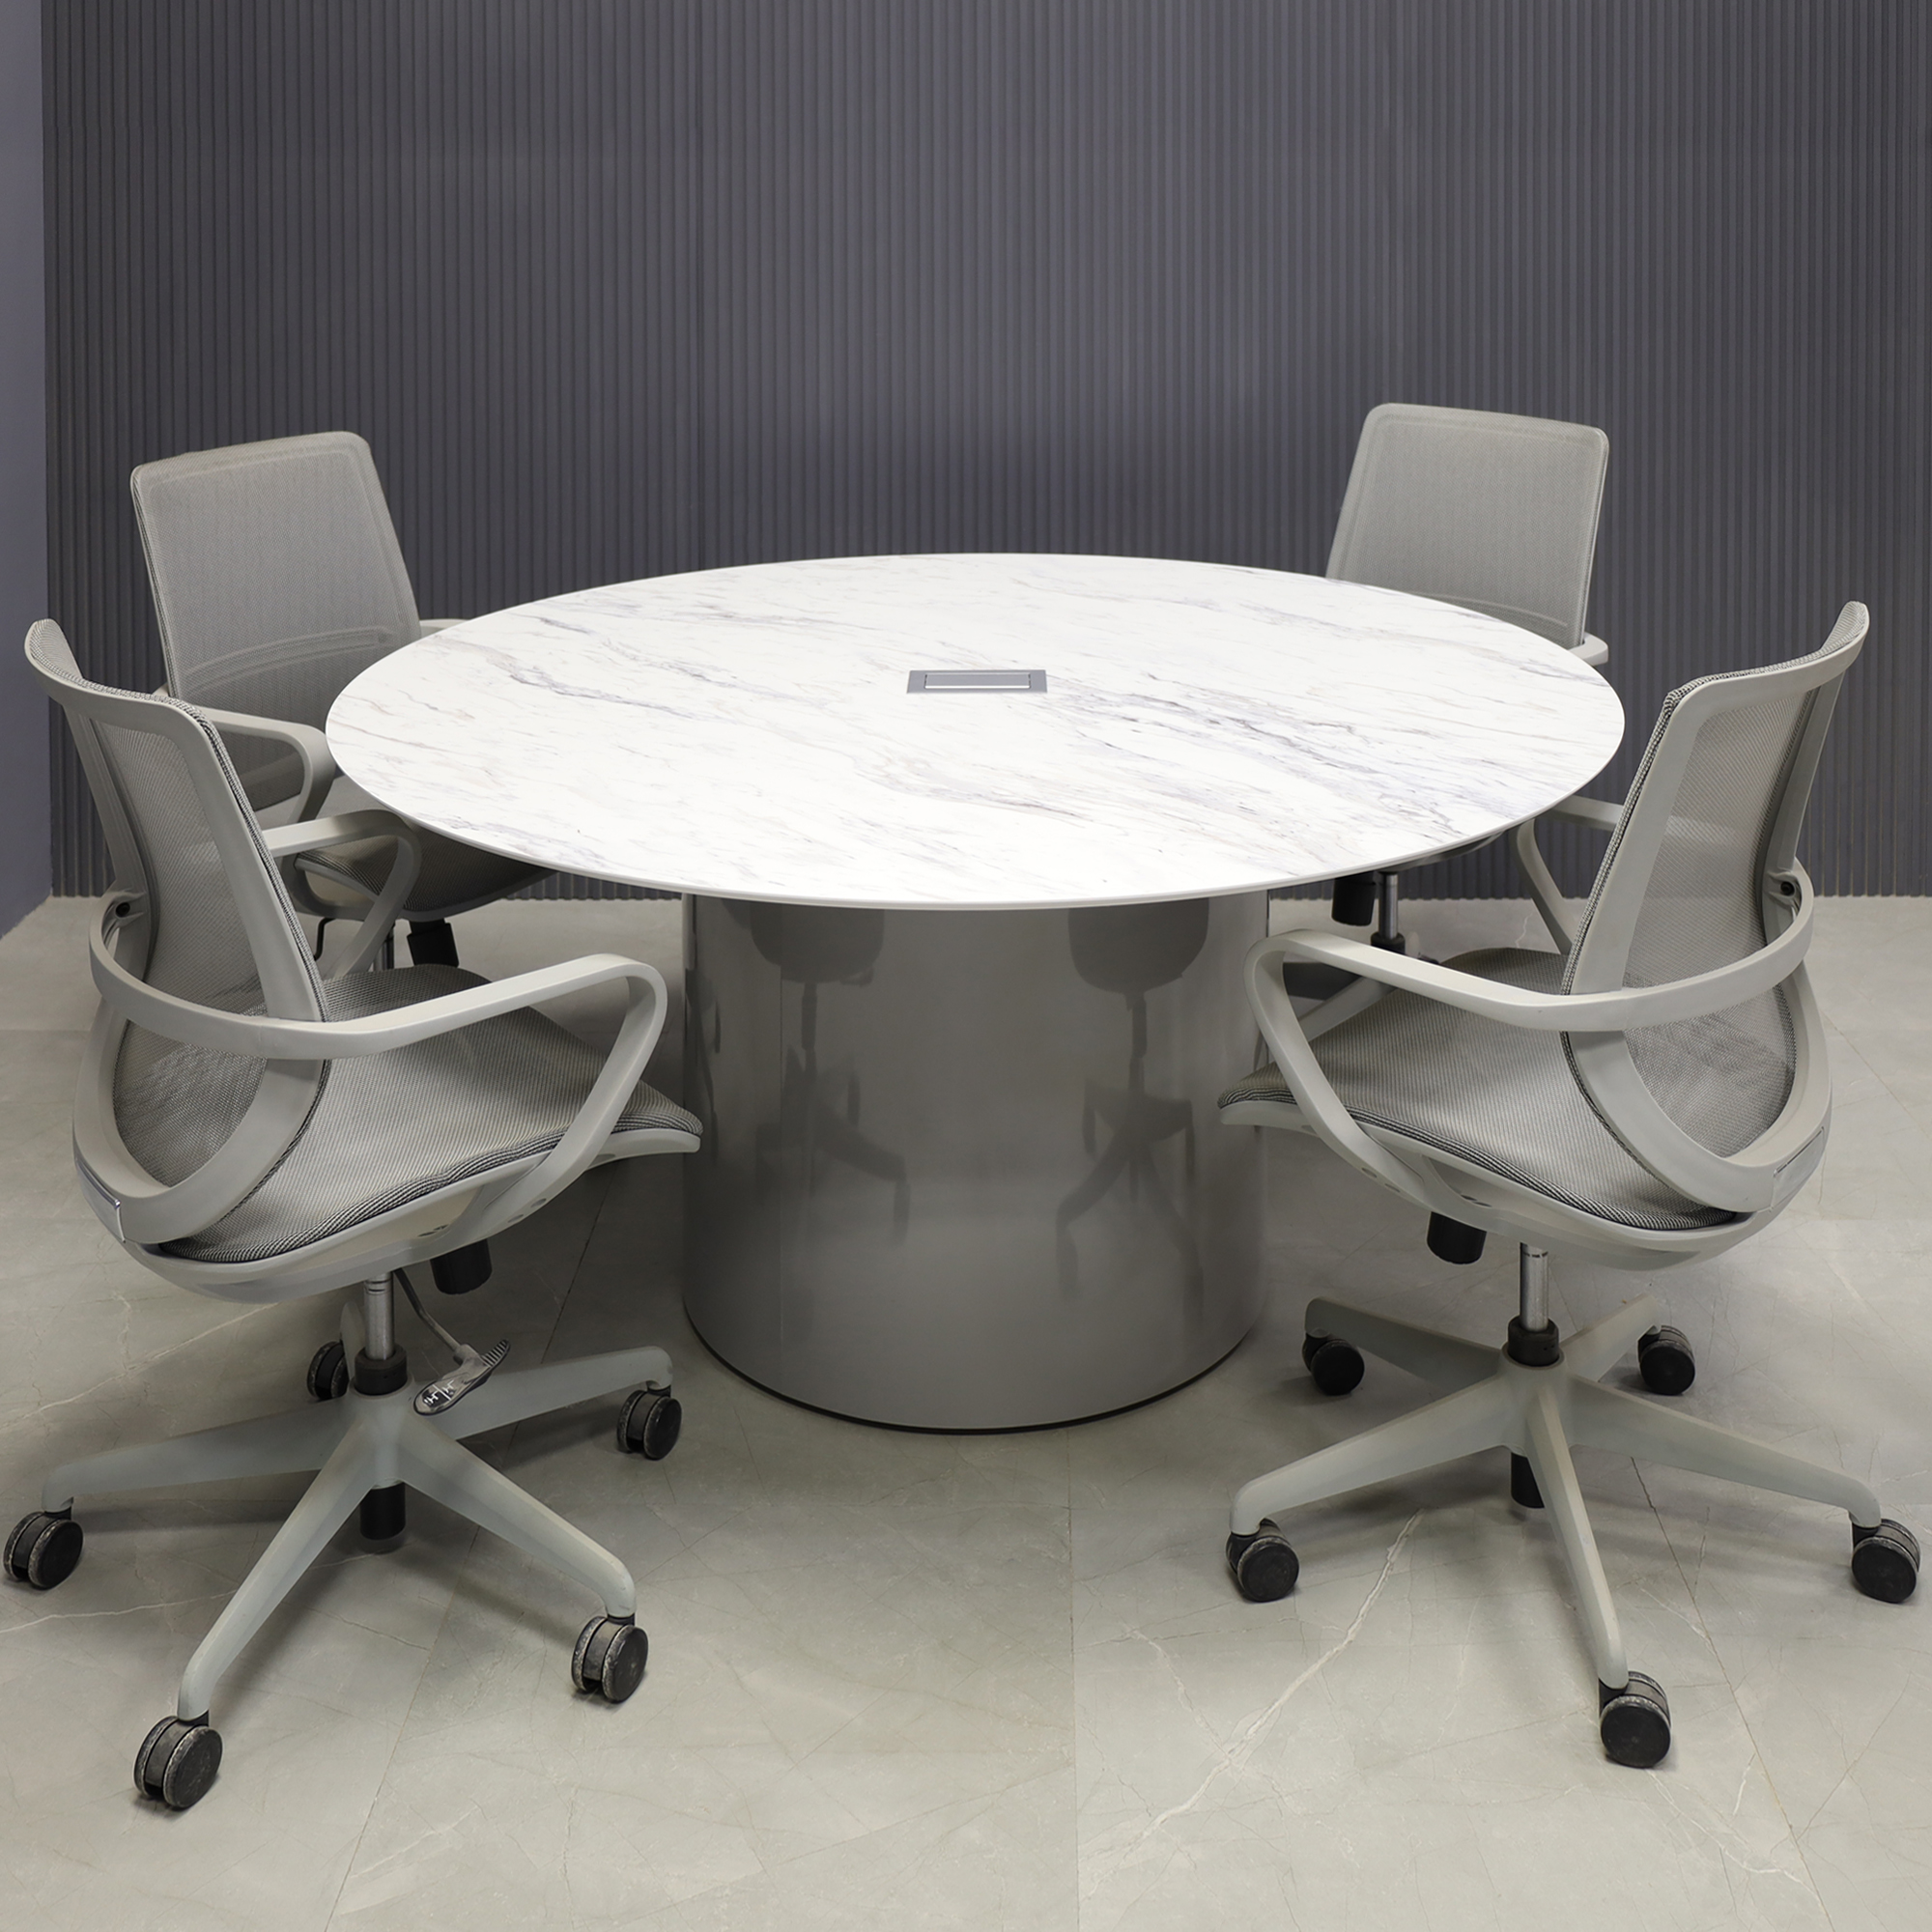 60-inch Aurora Round Conference Table in 1/2